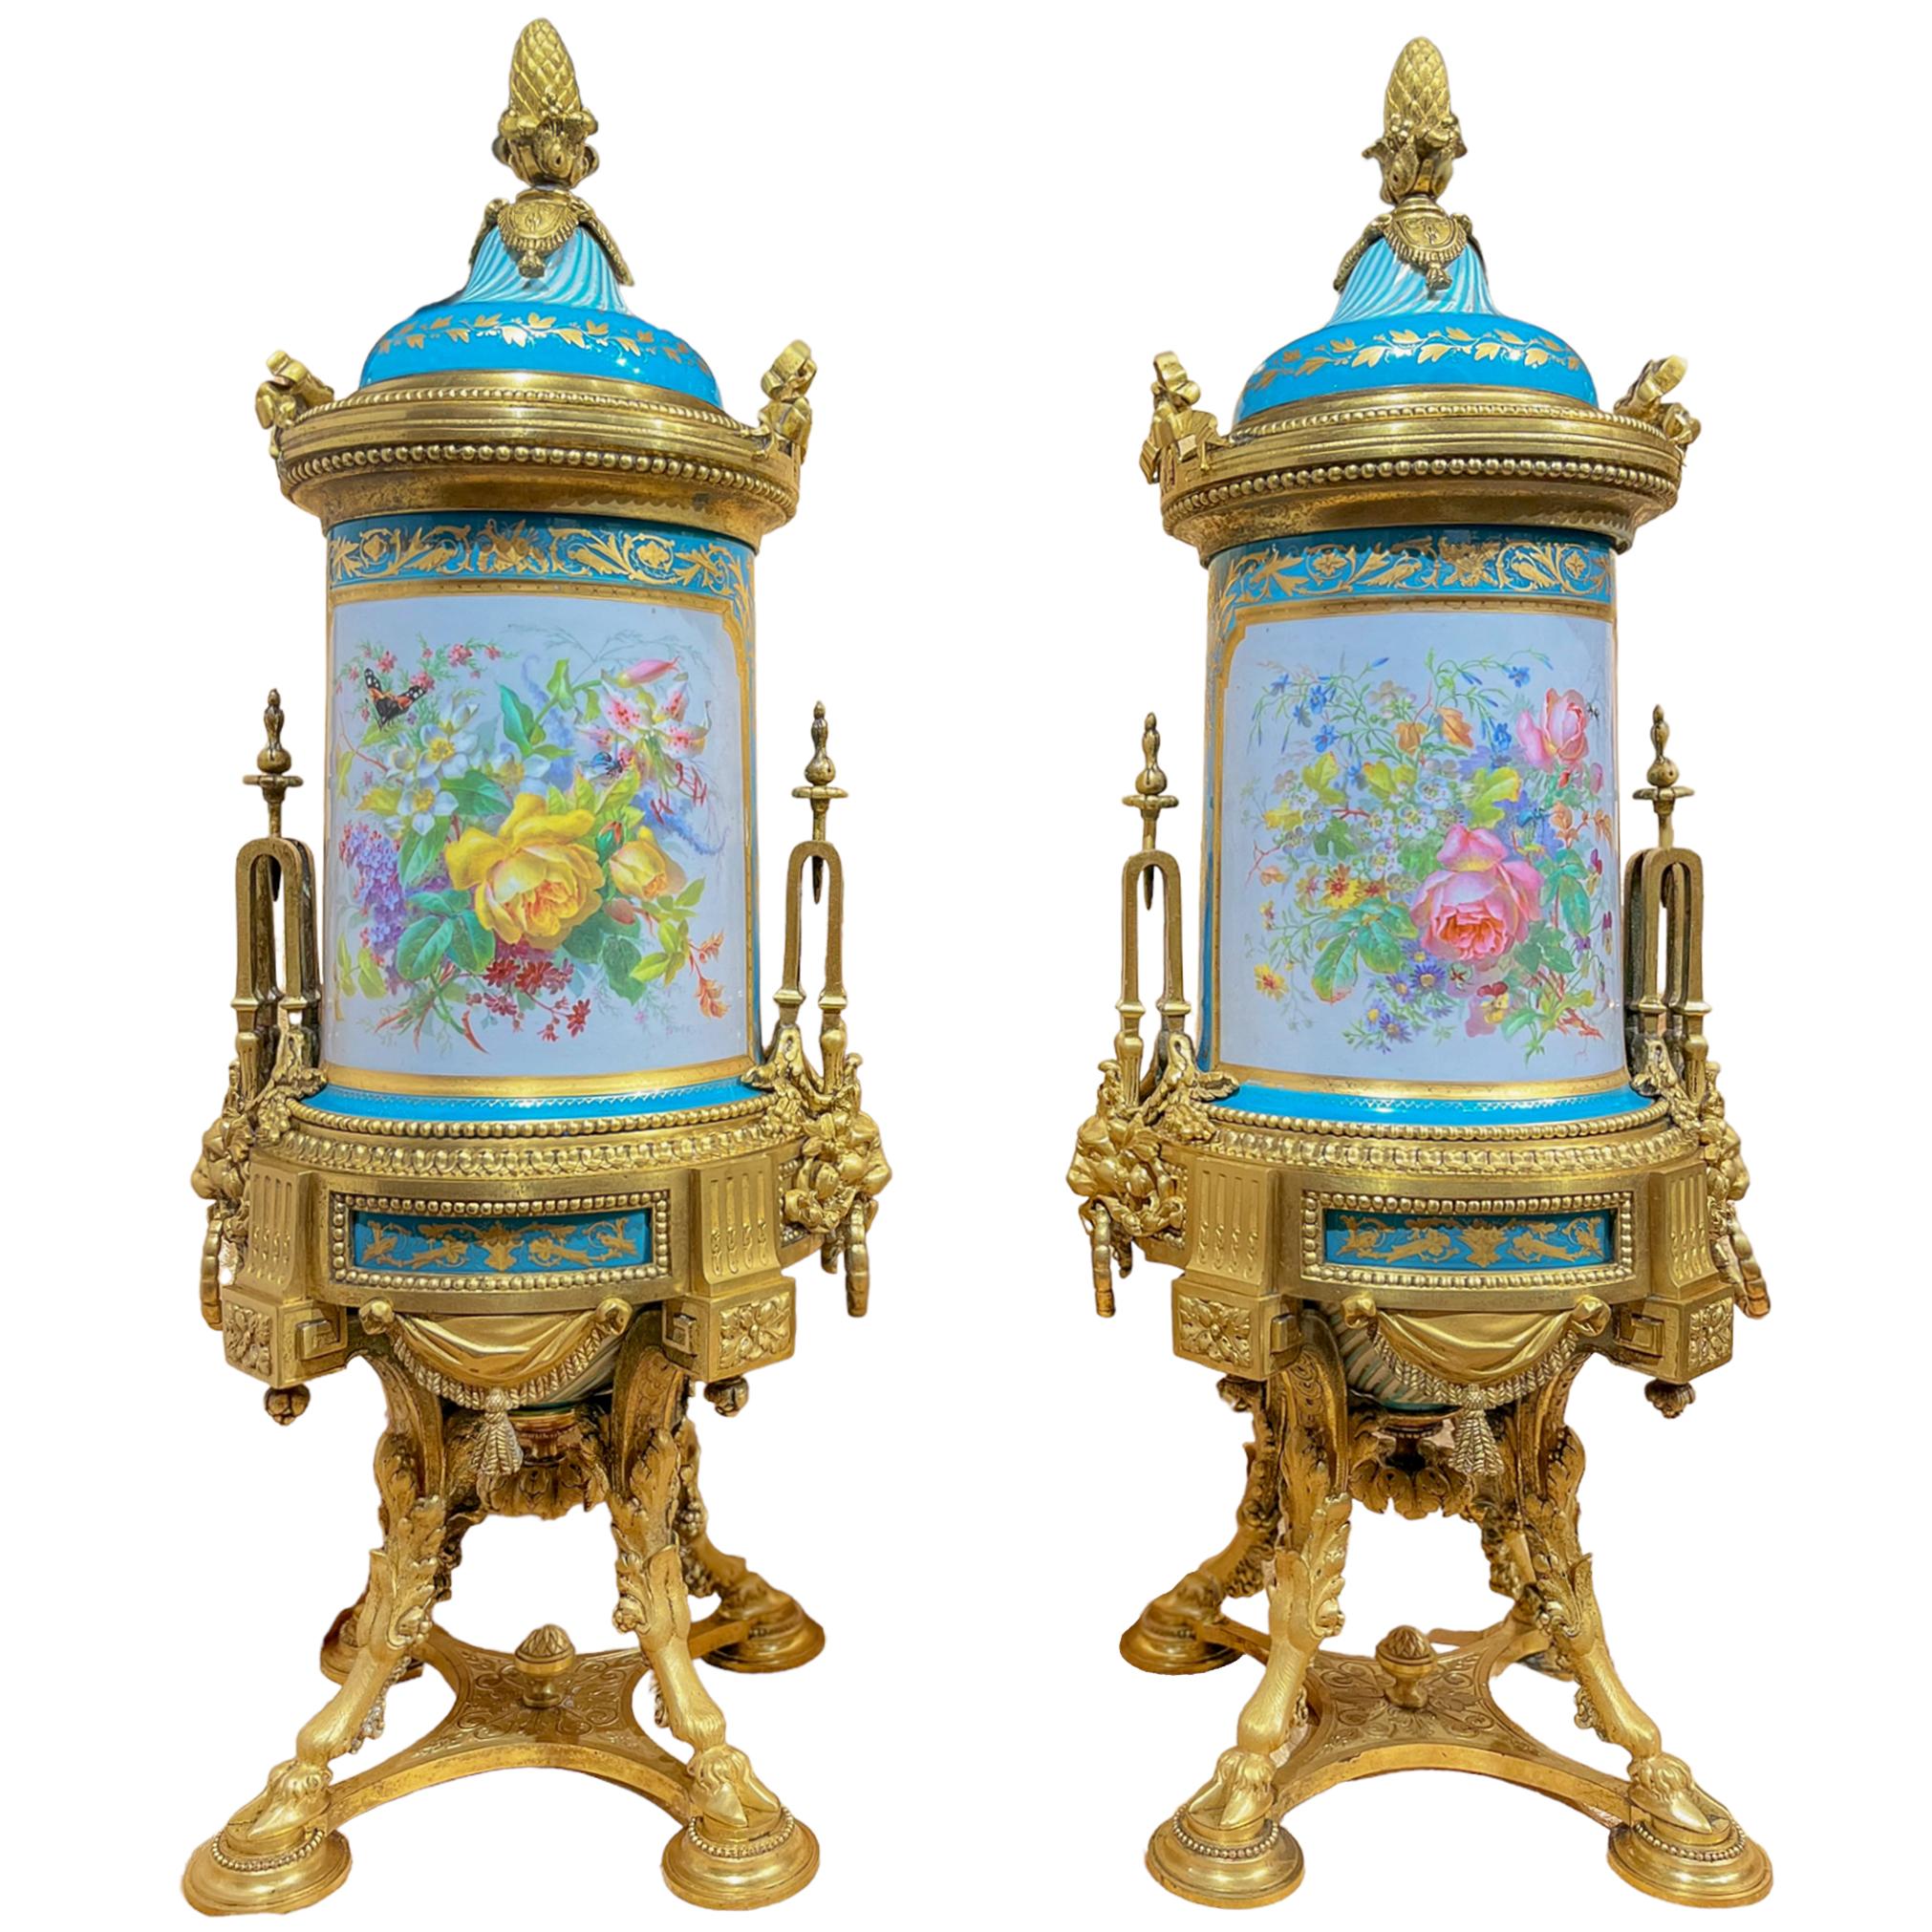 19th Century Exceptional and Unusual Pair of Porcelain Cerulean and Ormolu Urns For Sale